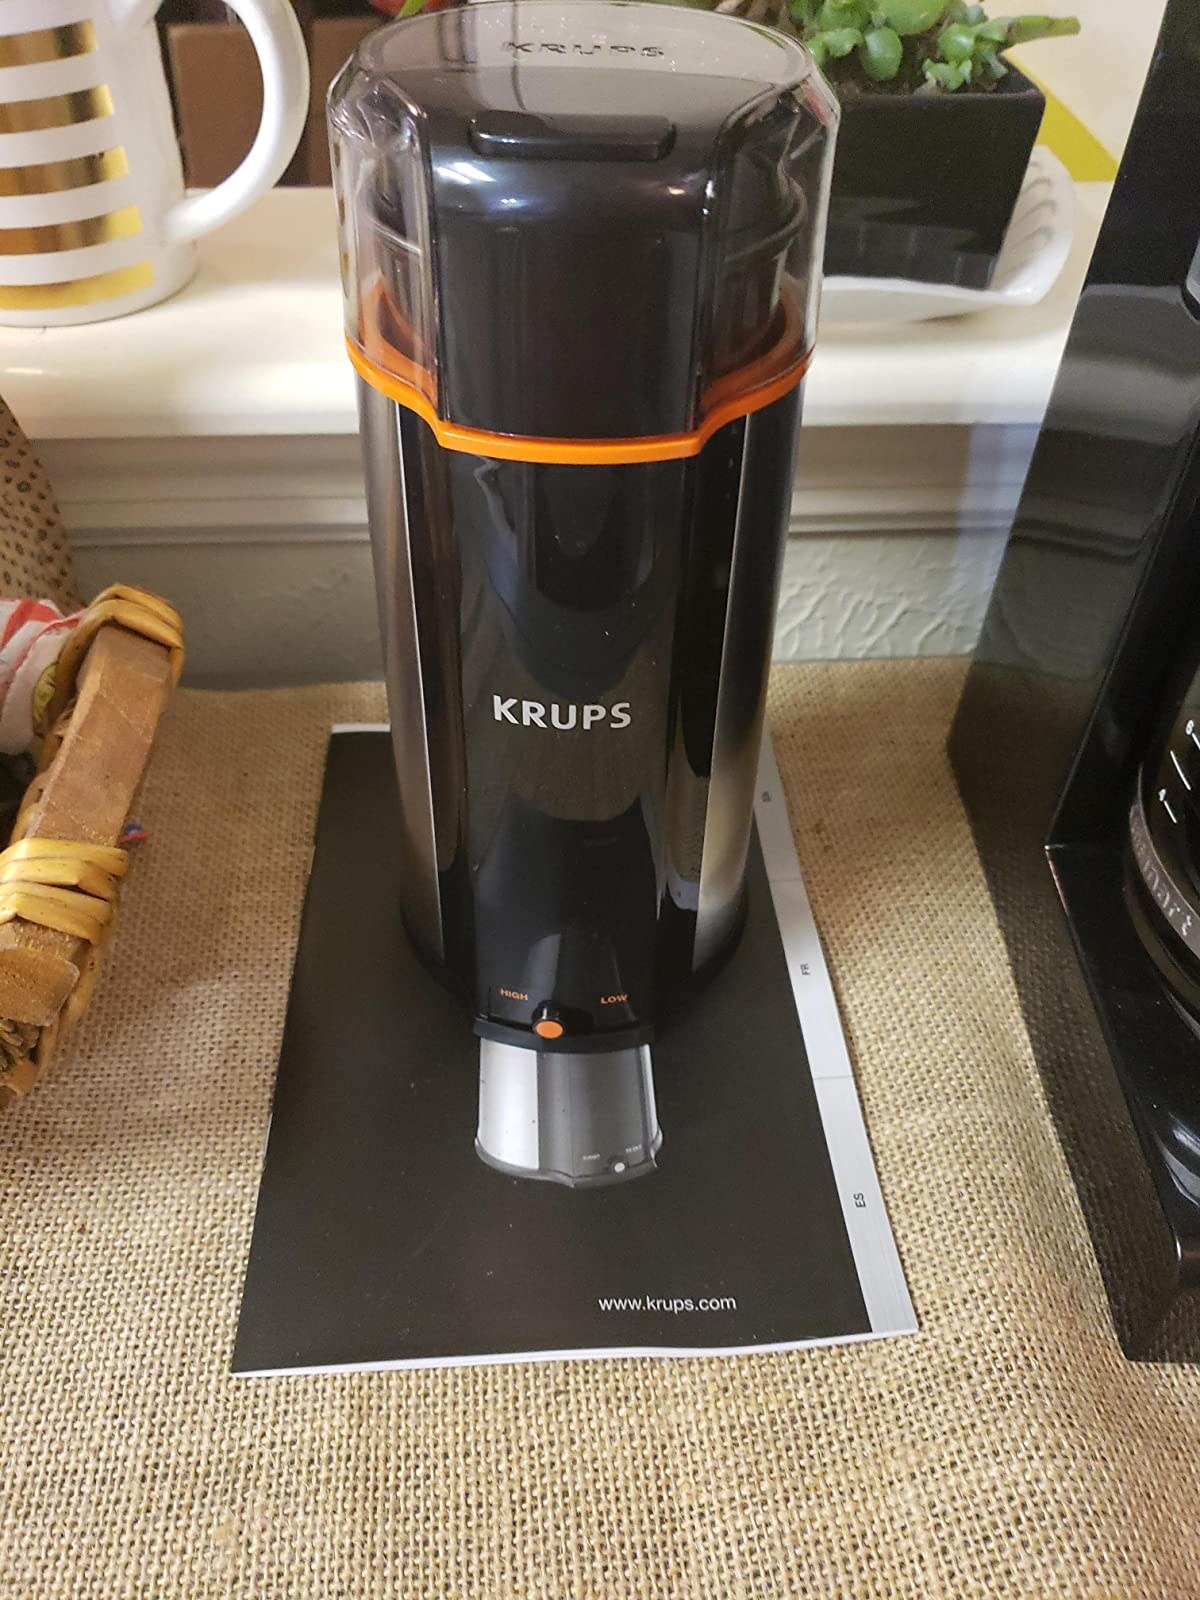 Reviewer photo of Krups coffee grinder placed on countertop